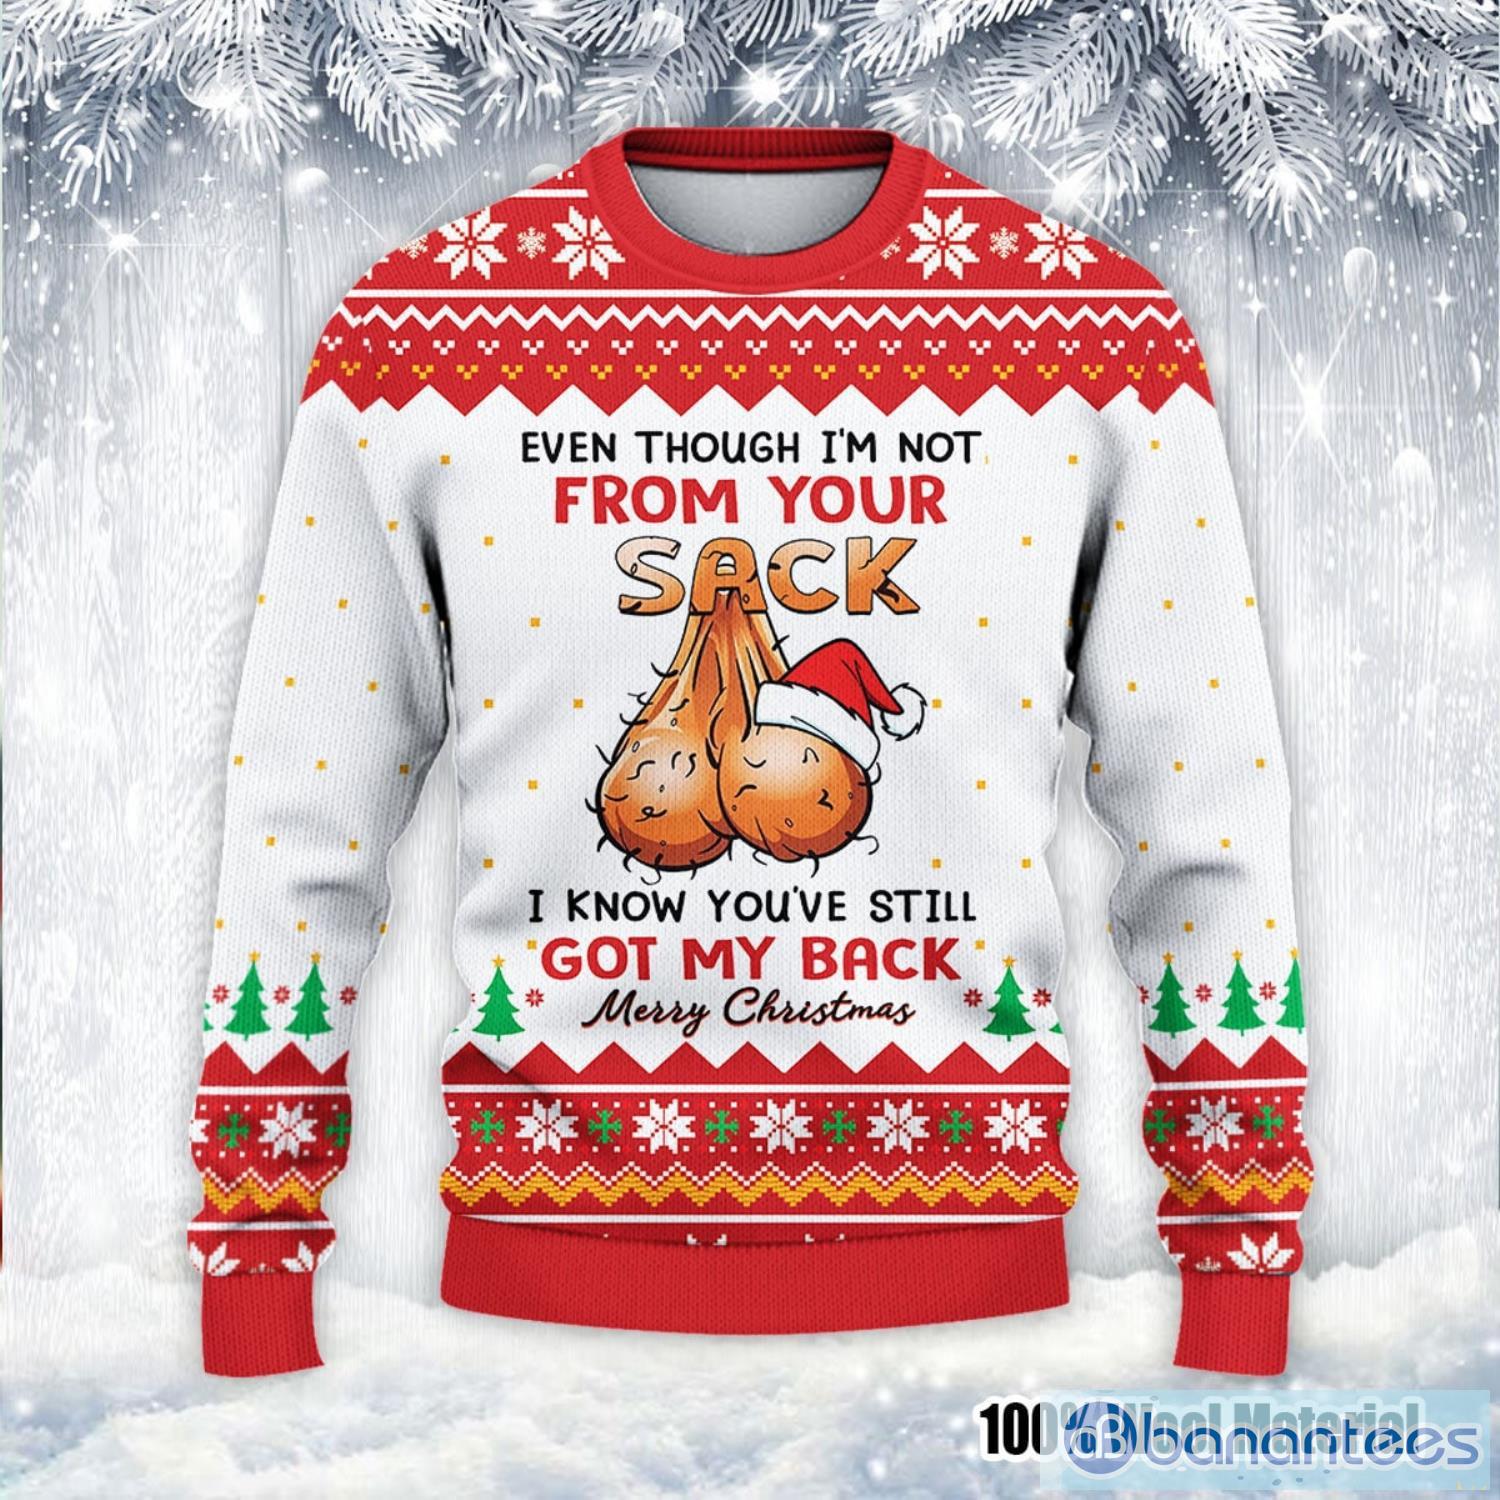 Even Though I'm Not From Your Sack You've Still Got My Back Christmas Ugly Christmas Sweater Product Photo